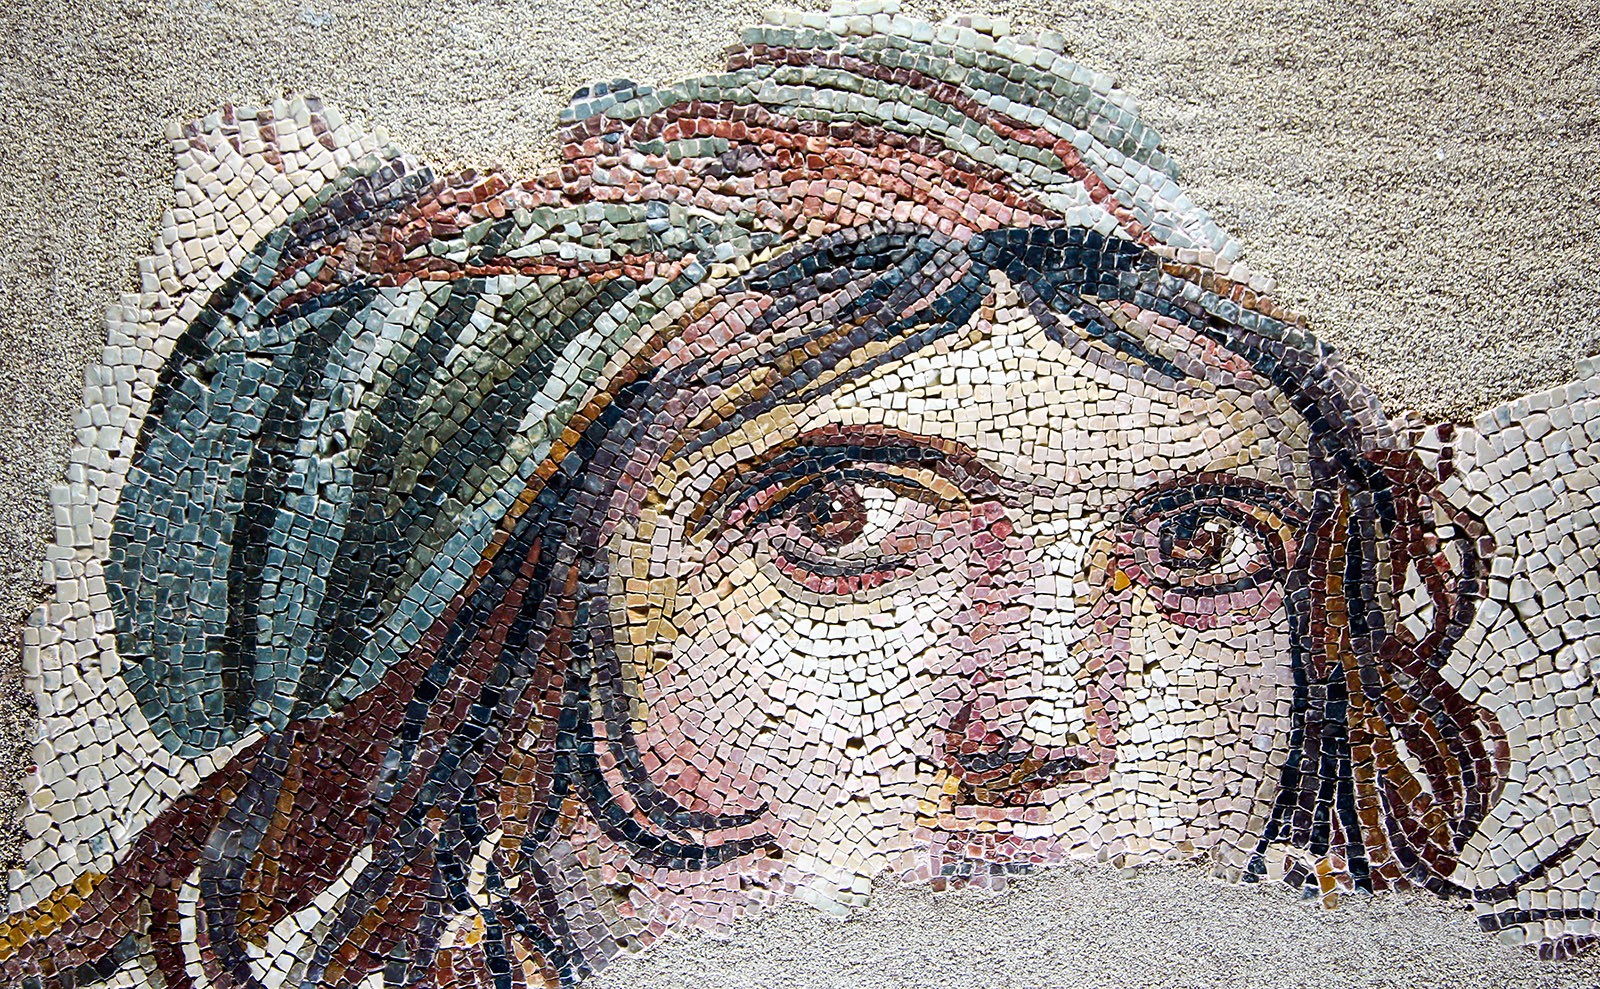 Zeugma Mosaics, Weird Reading, Crater Lake, 100 Best Mysteries & More: Endnotes 06 October